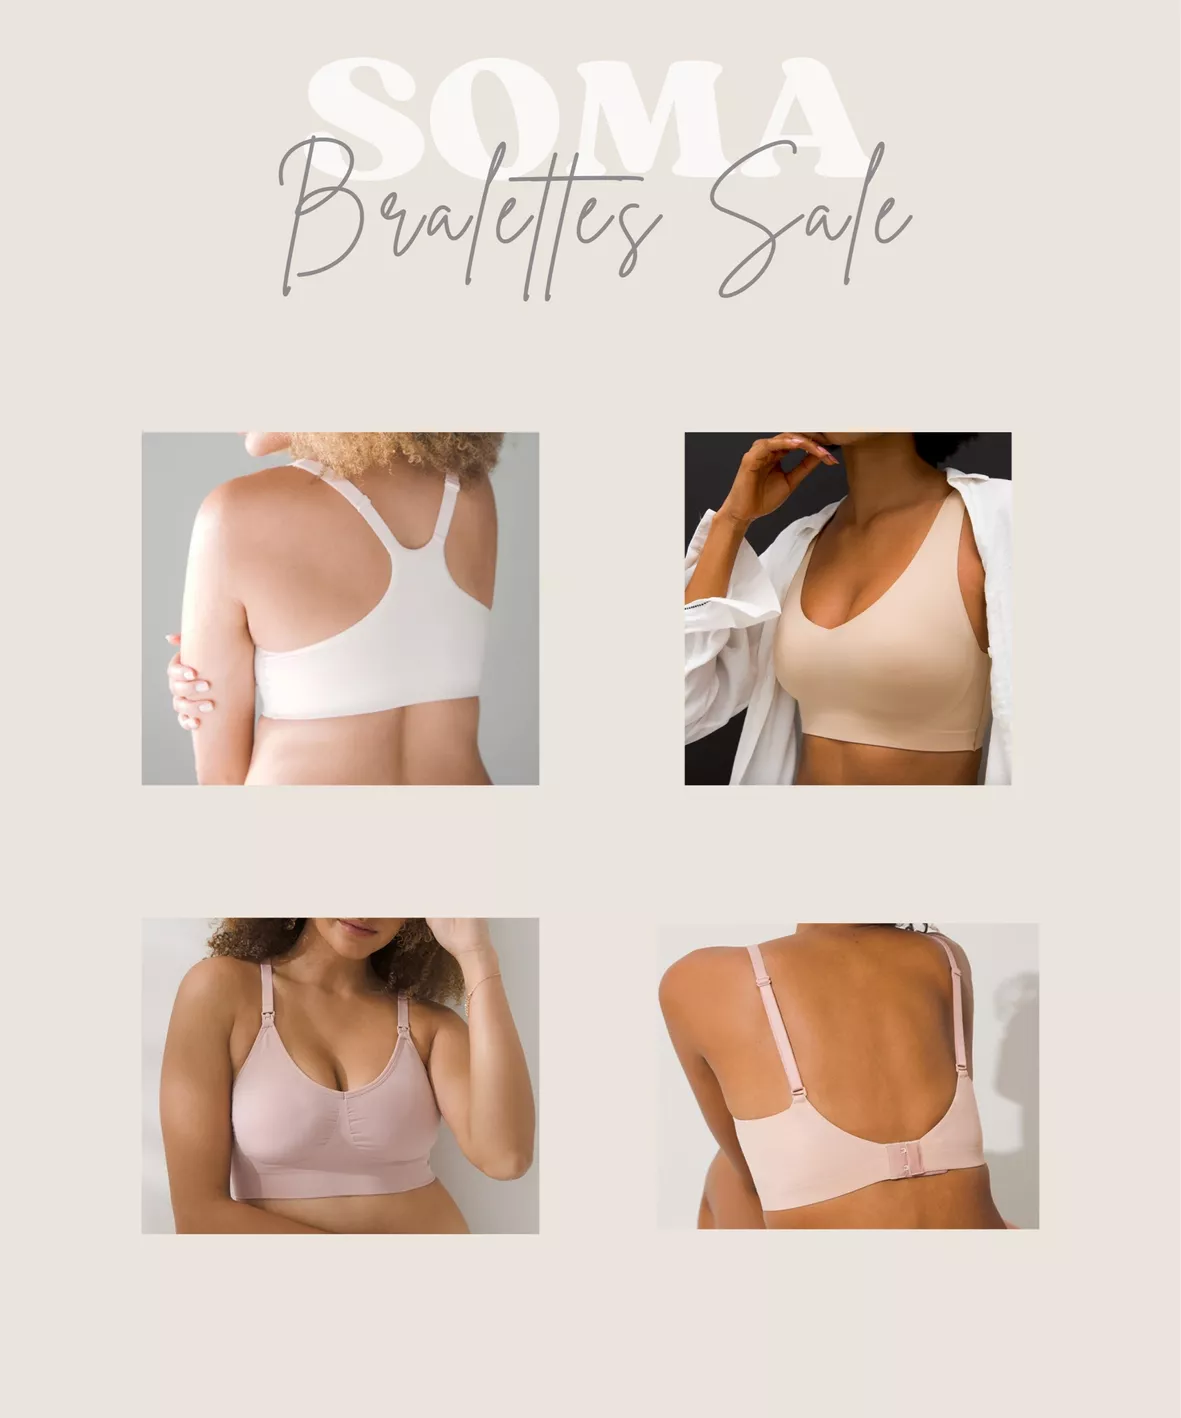 Soma Enbliss bras $25 each!! Free shipping if you buy one of these